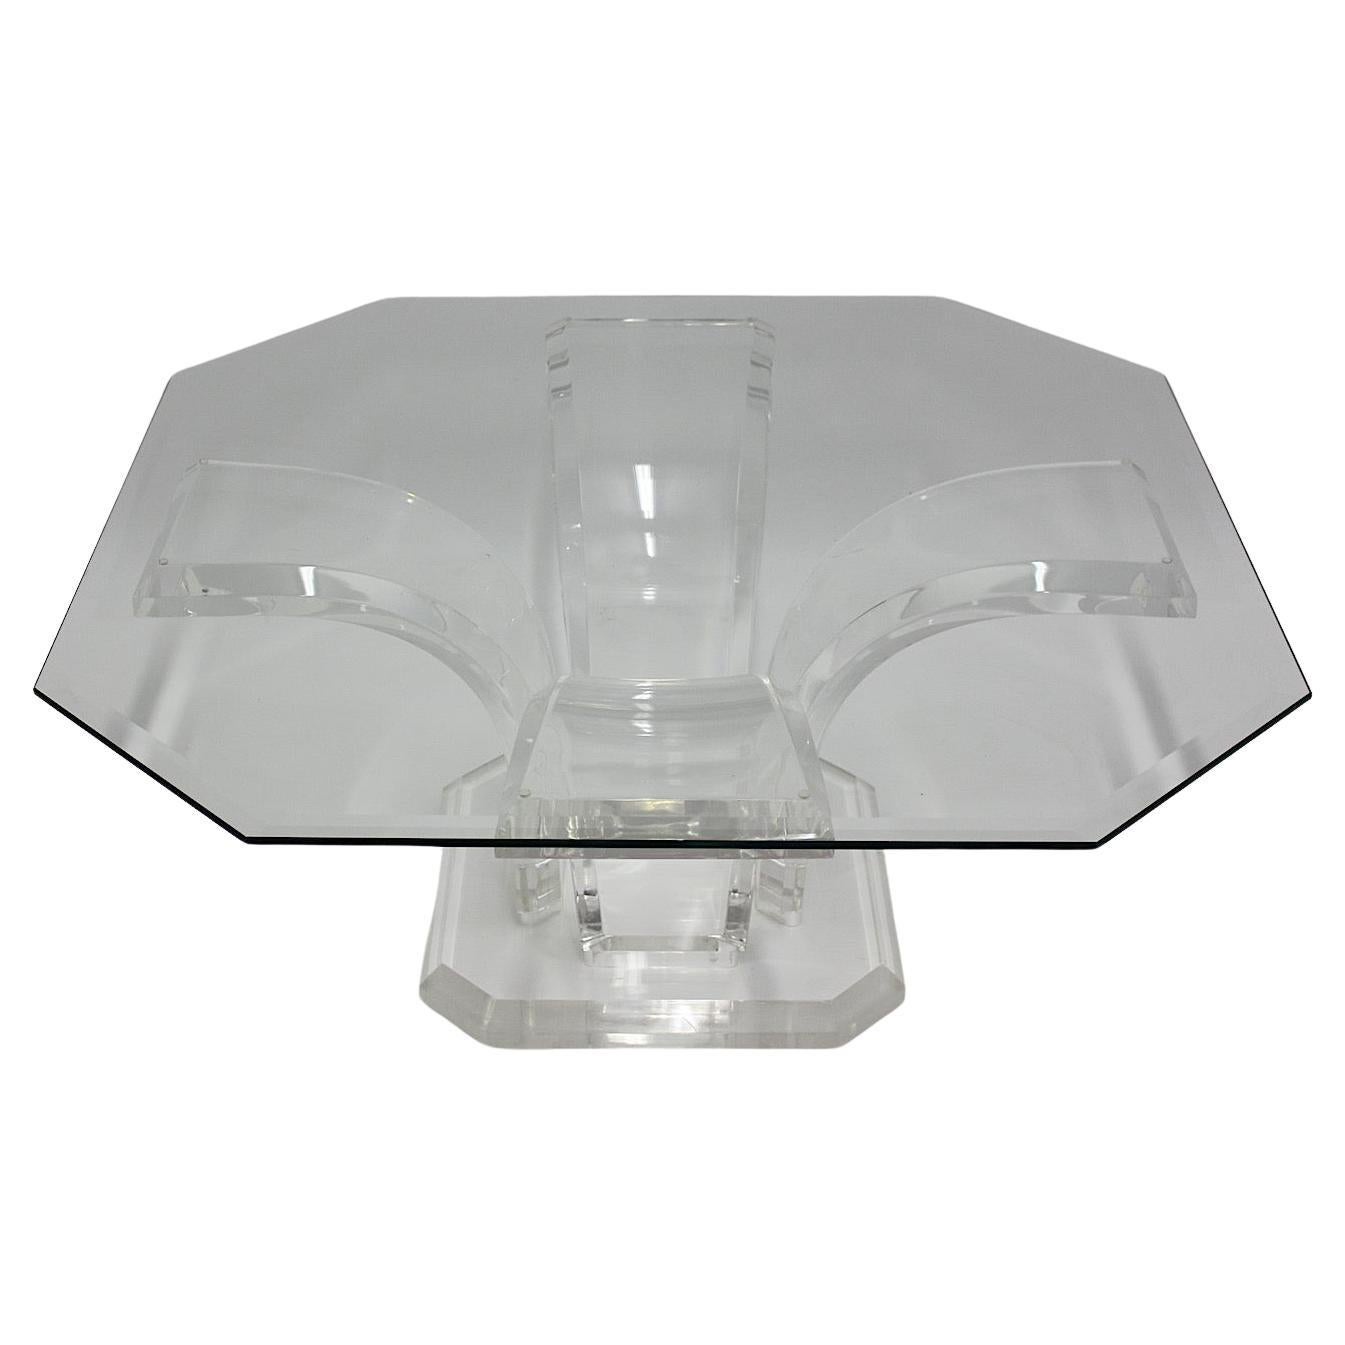 Space Age Vintage Rectangular Transparent Lucite Glass Coffee Table circa 1970